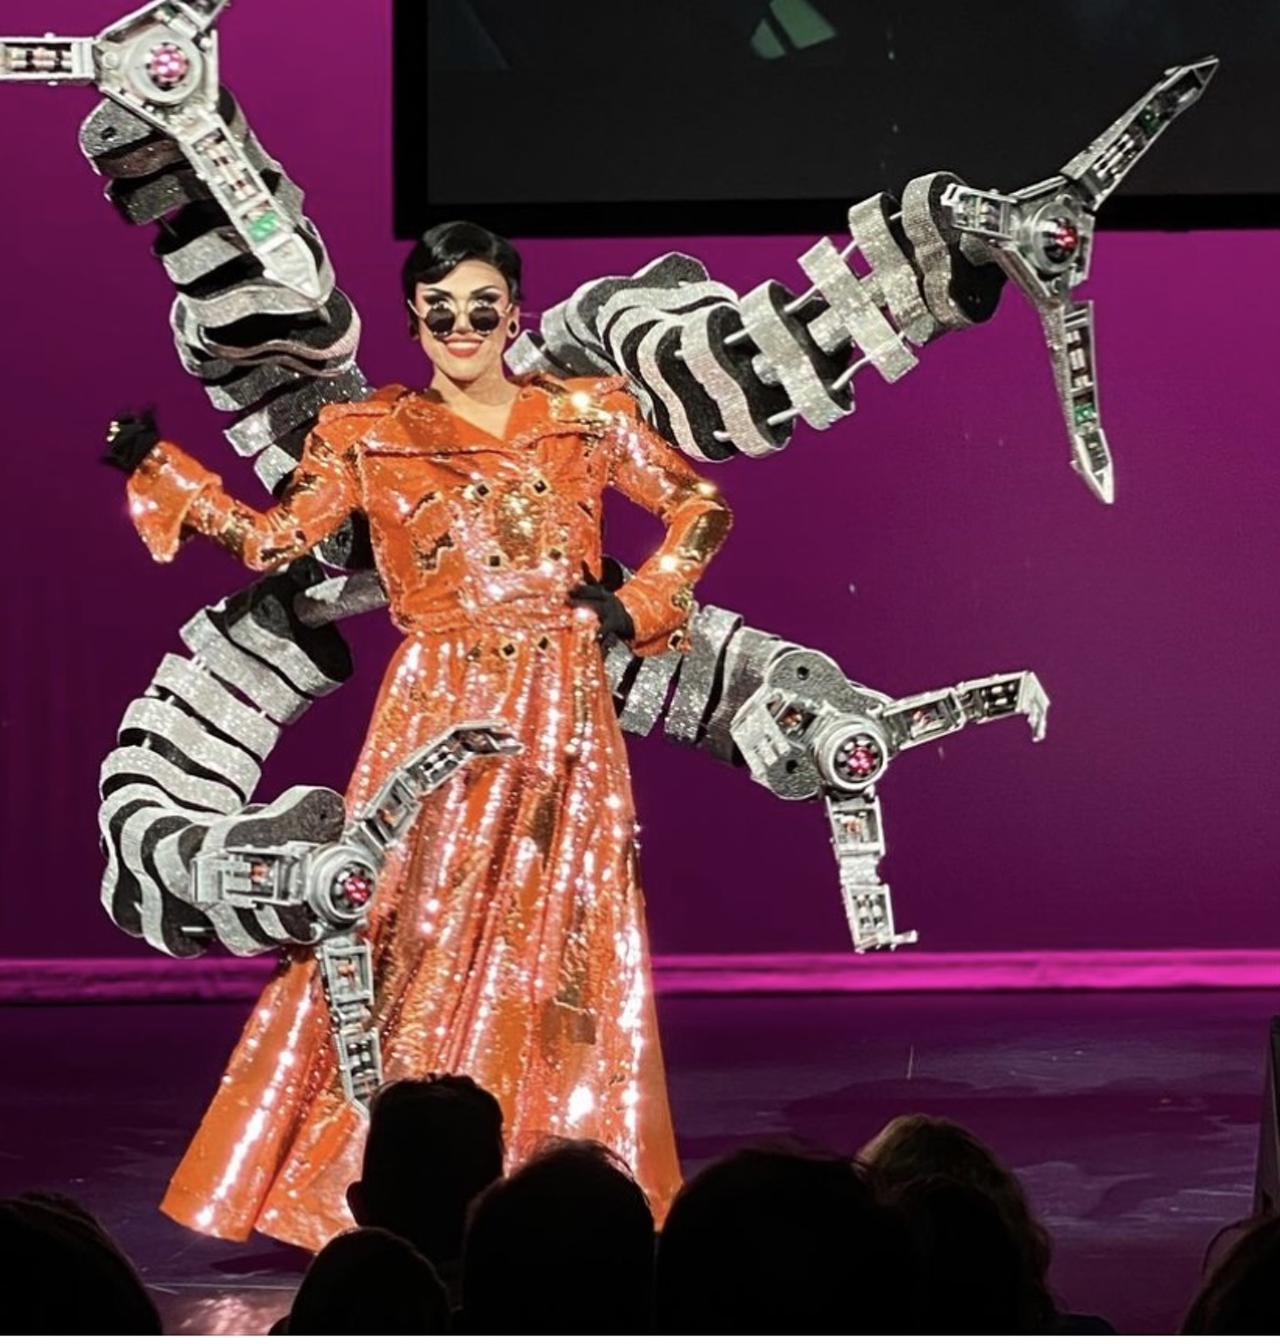 Mr Ms Adrien 
As soon as you click on their profile, the Dr. Octopus outfit will immediately hook you in. They won National Miss Comedy Queen in 2022 and even have looks from Rocky Horror.
